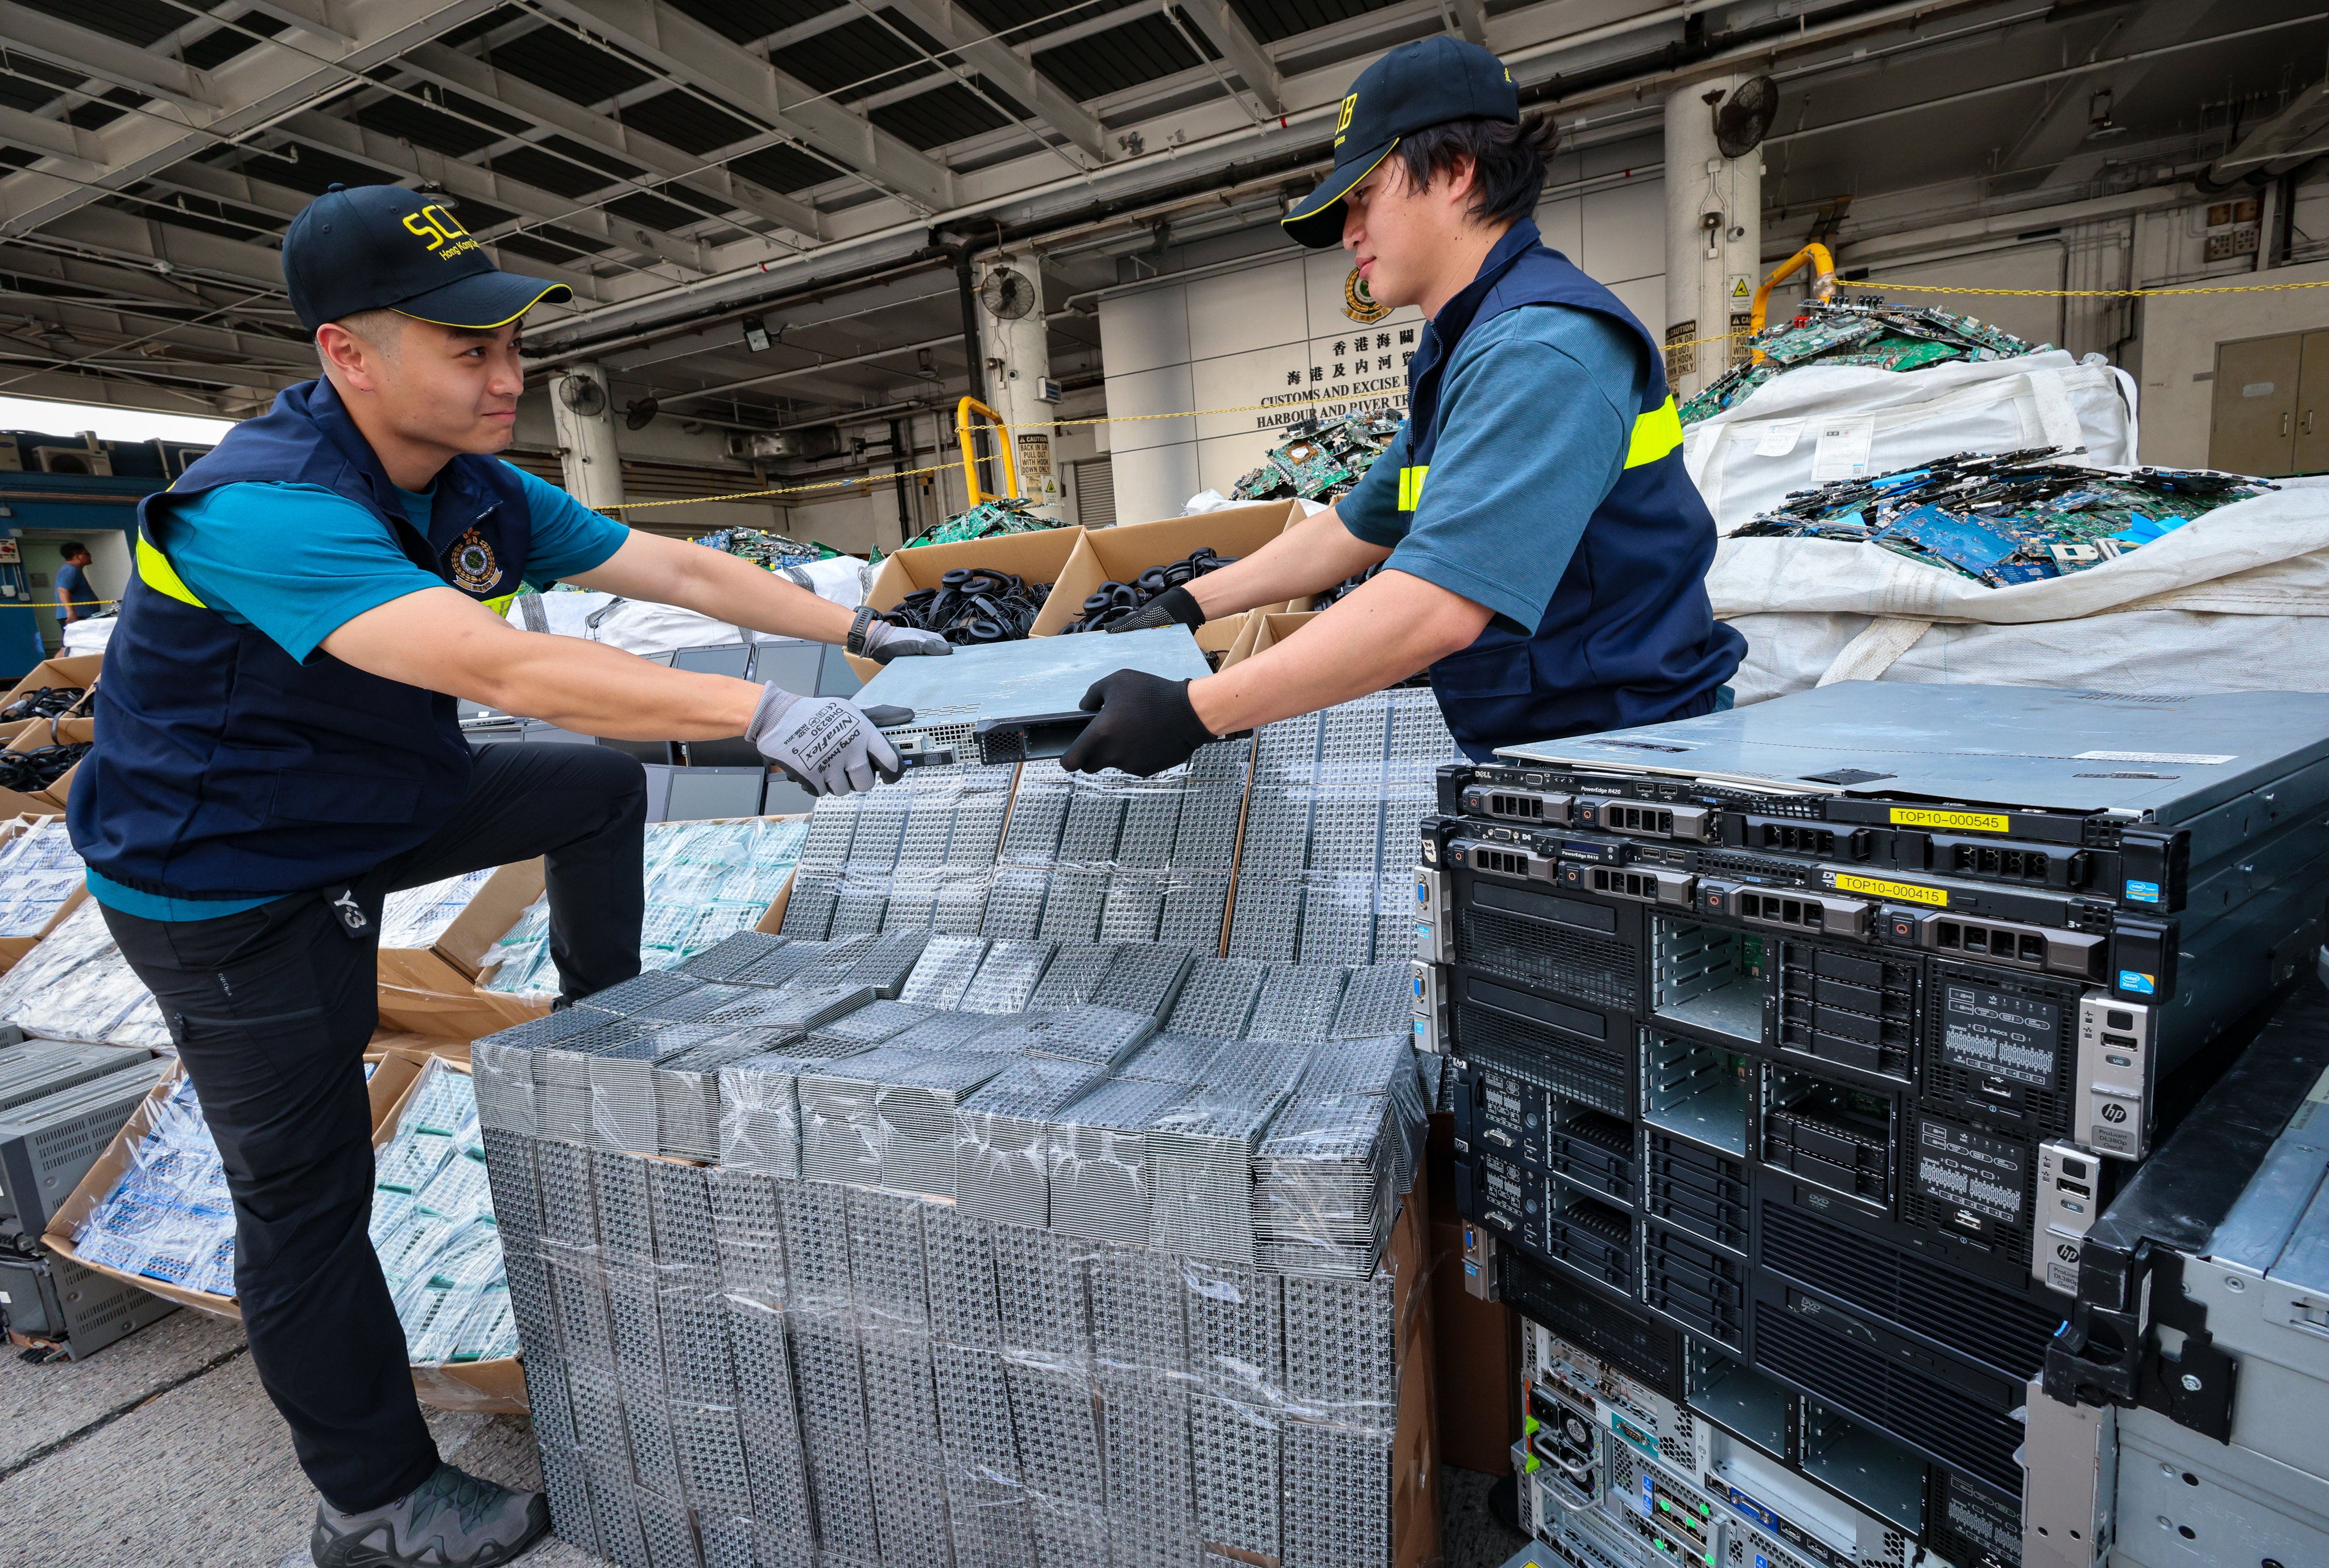 The haul includes 3 million electronic chips that account for more than 90 per cent of its total estimated worth, according to a source. Photo: Dickson Lee